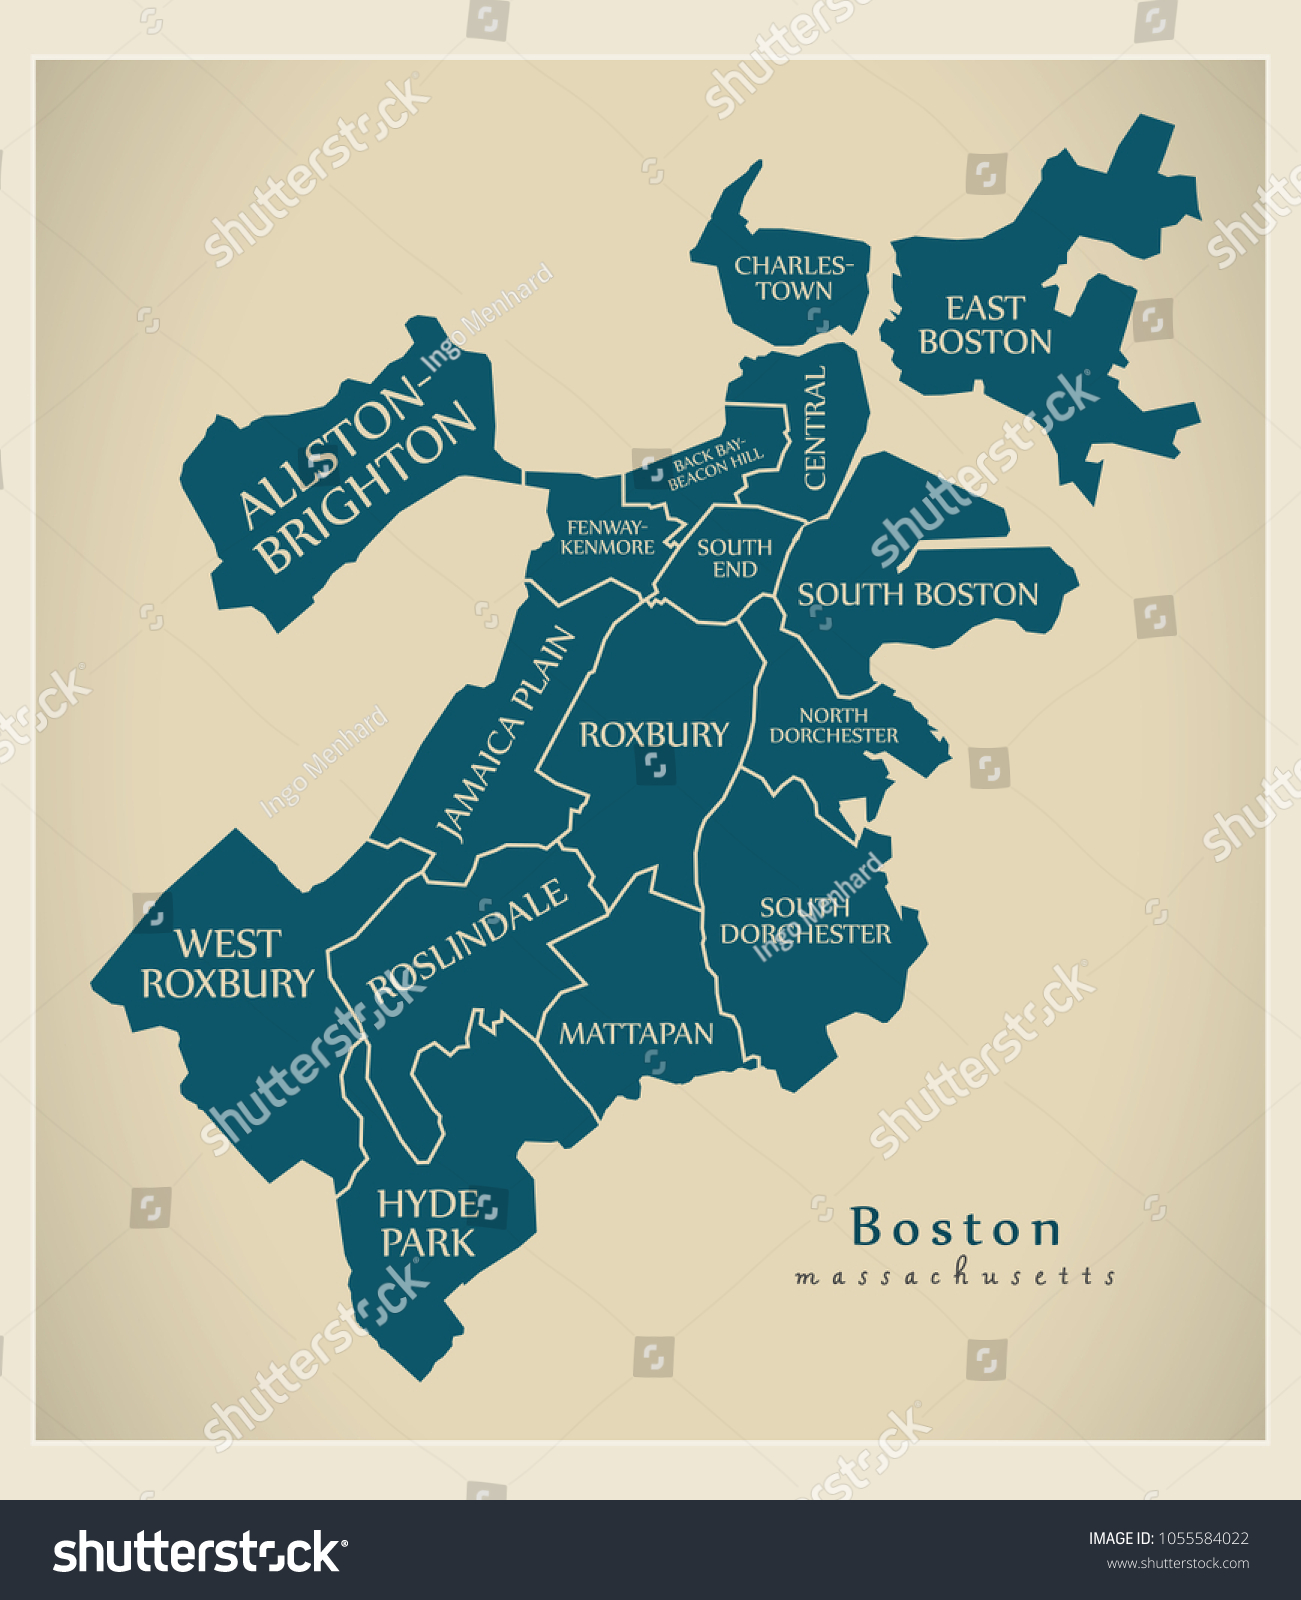 SVG of Modern City Map - Boston Massachusetts city of the USA with boroughs and titles svg